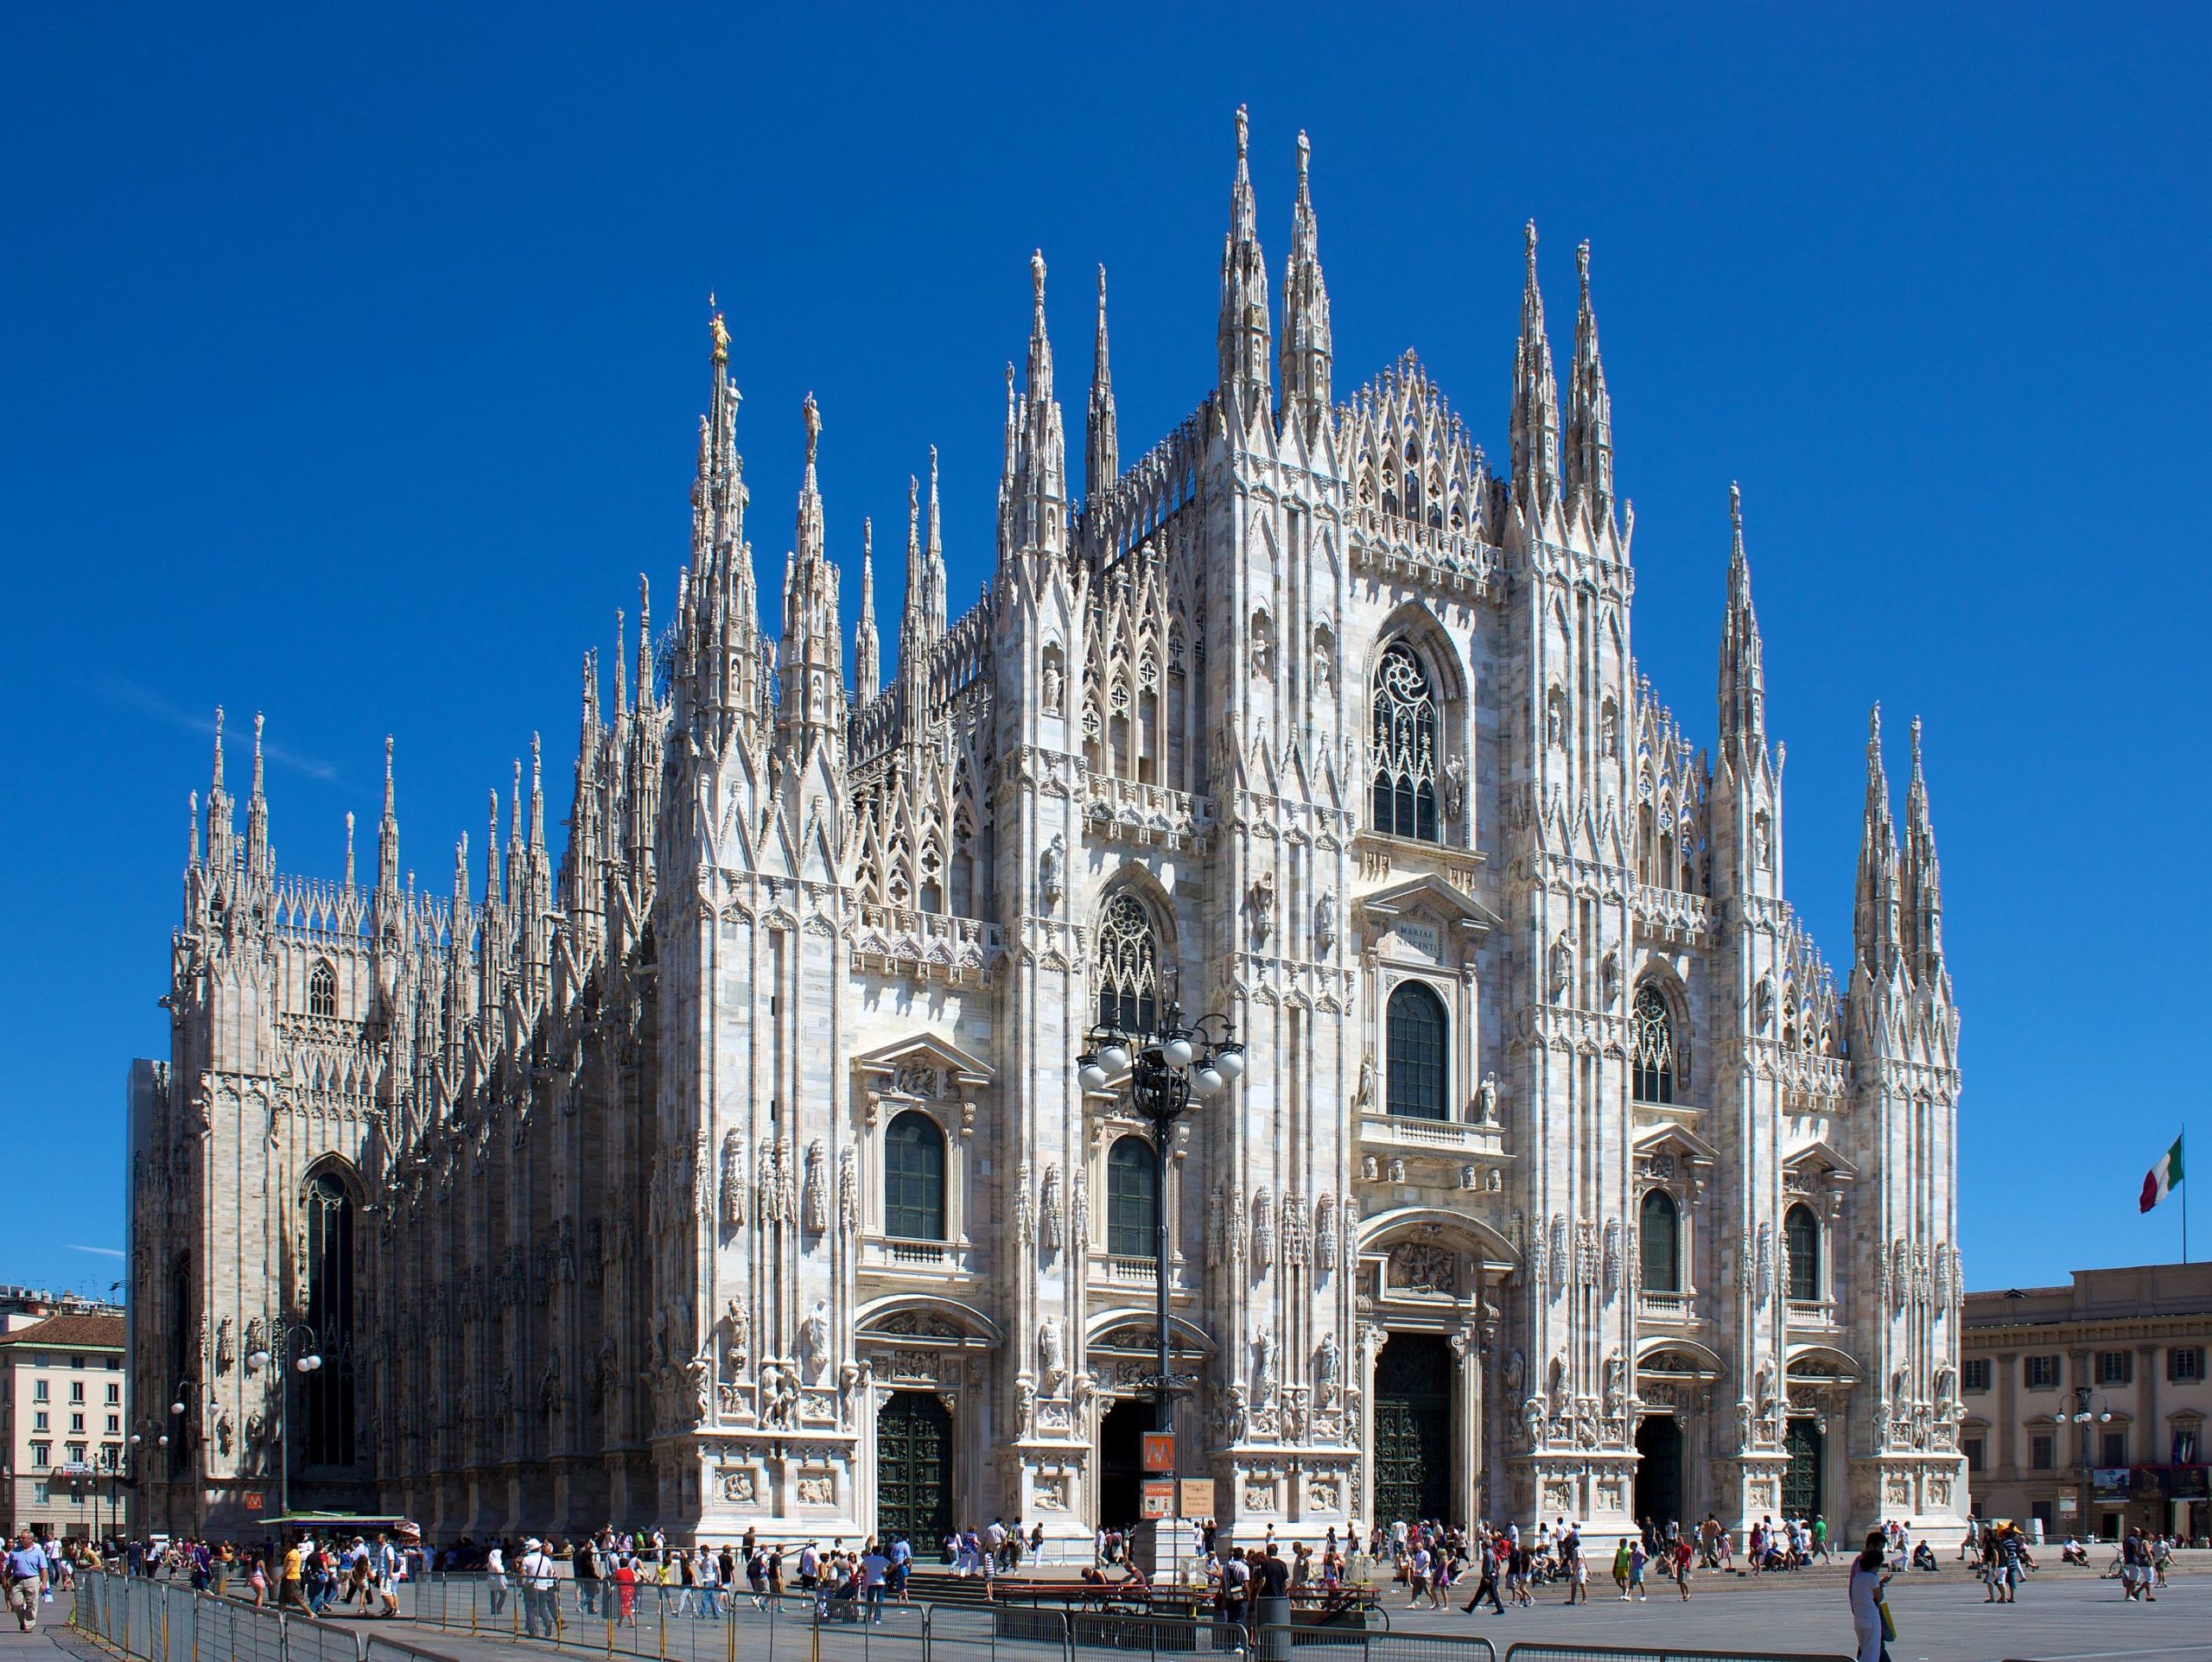 The Duomo di Milano, the largest church in Italy, has now reopened